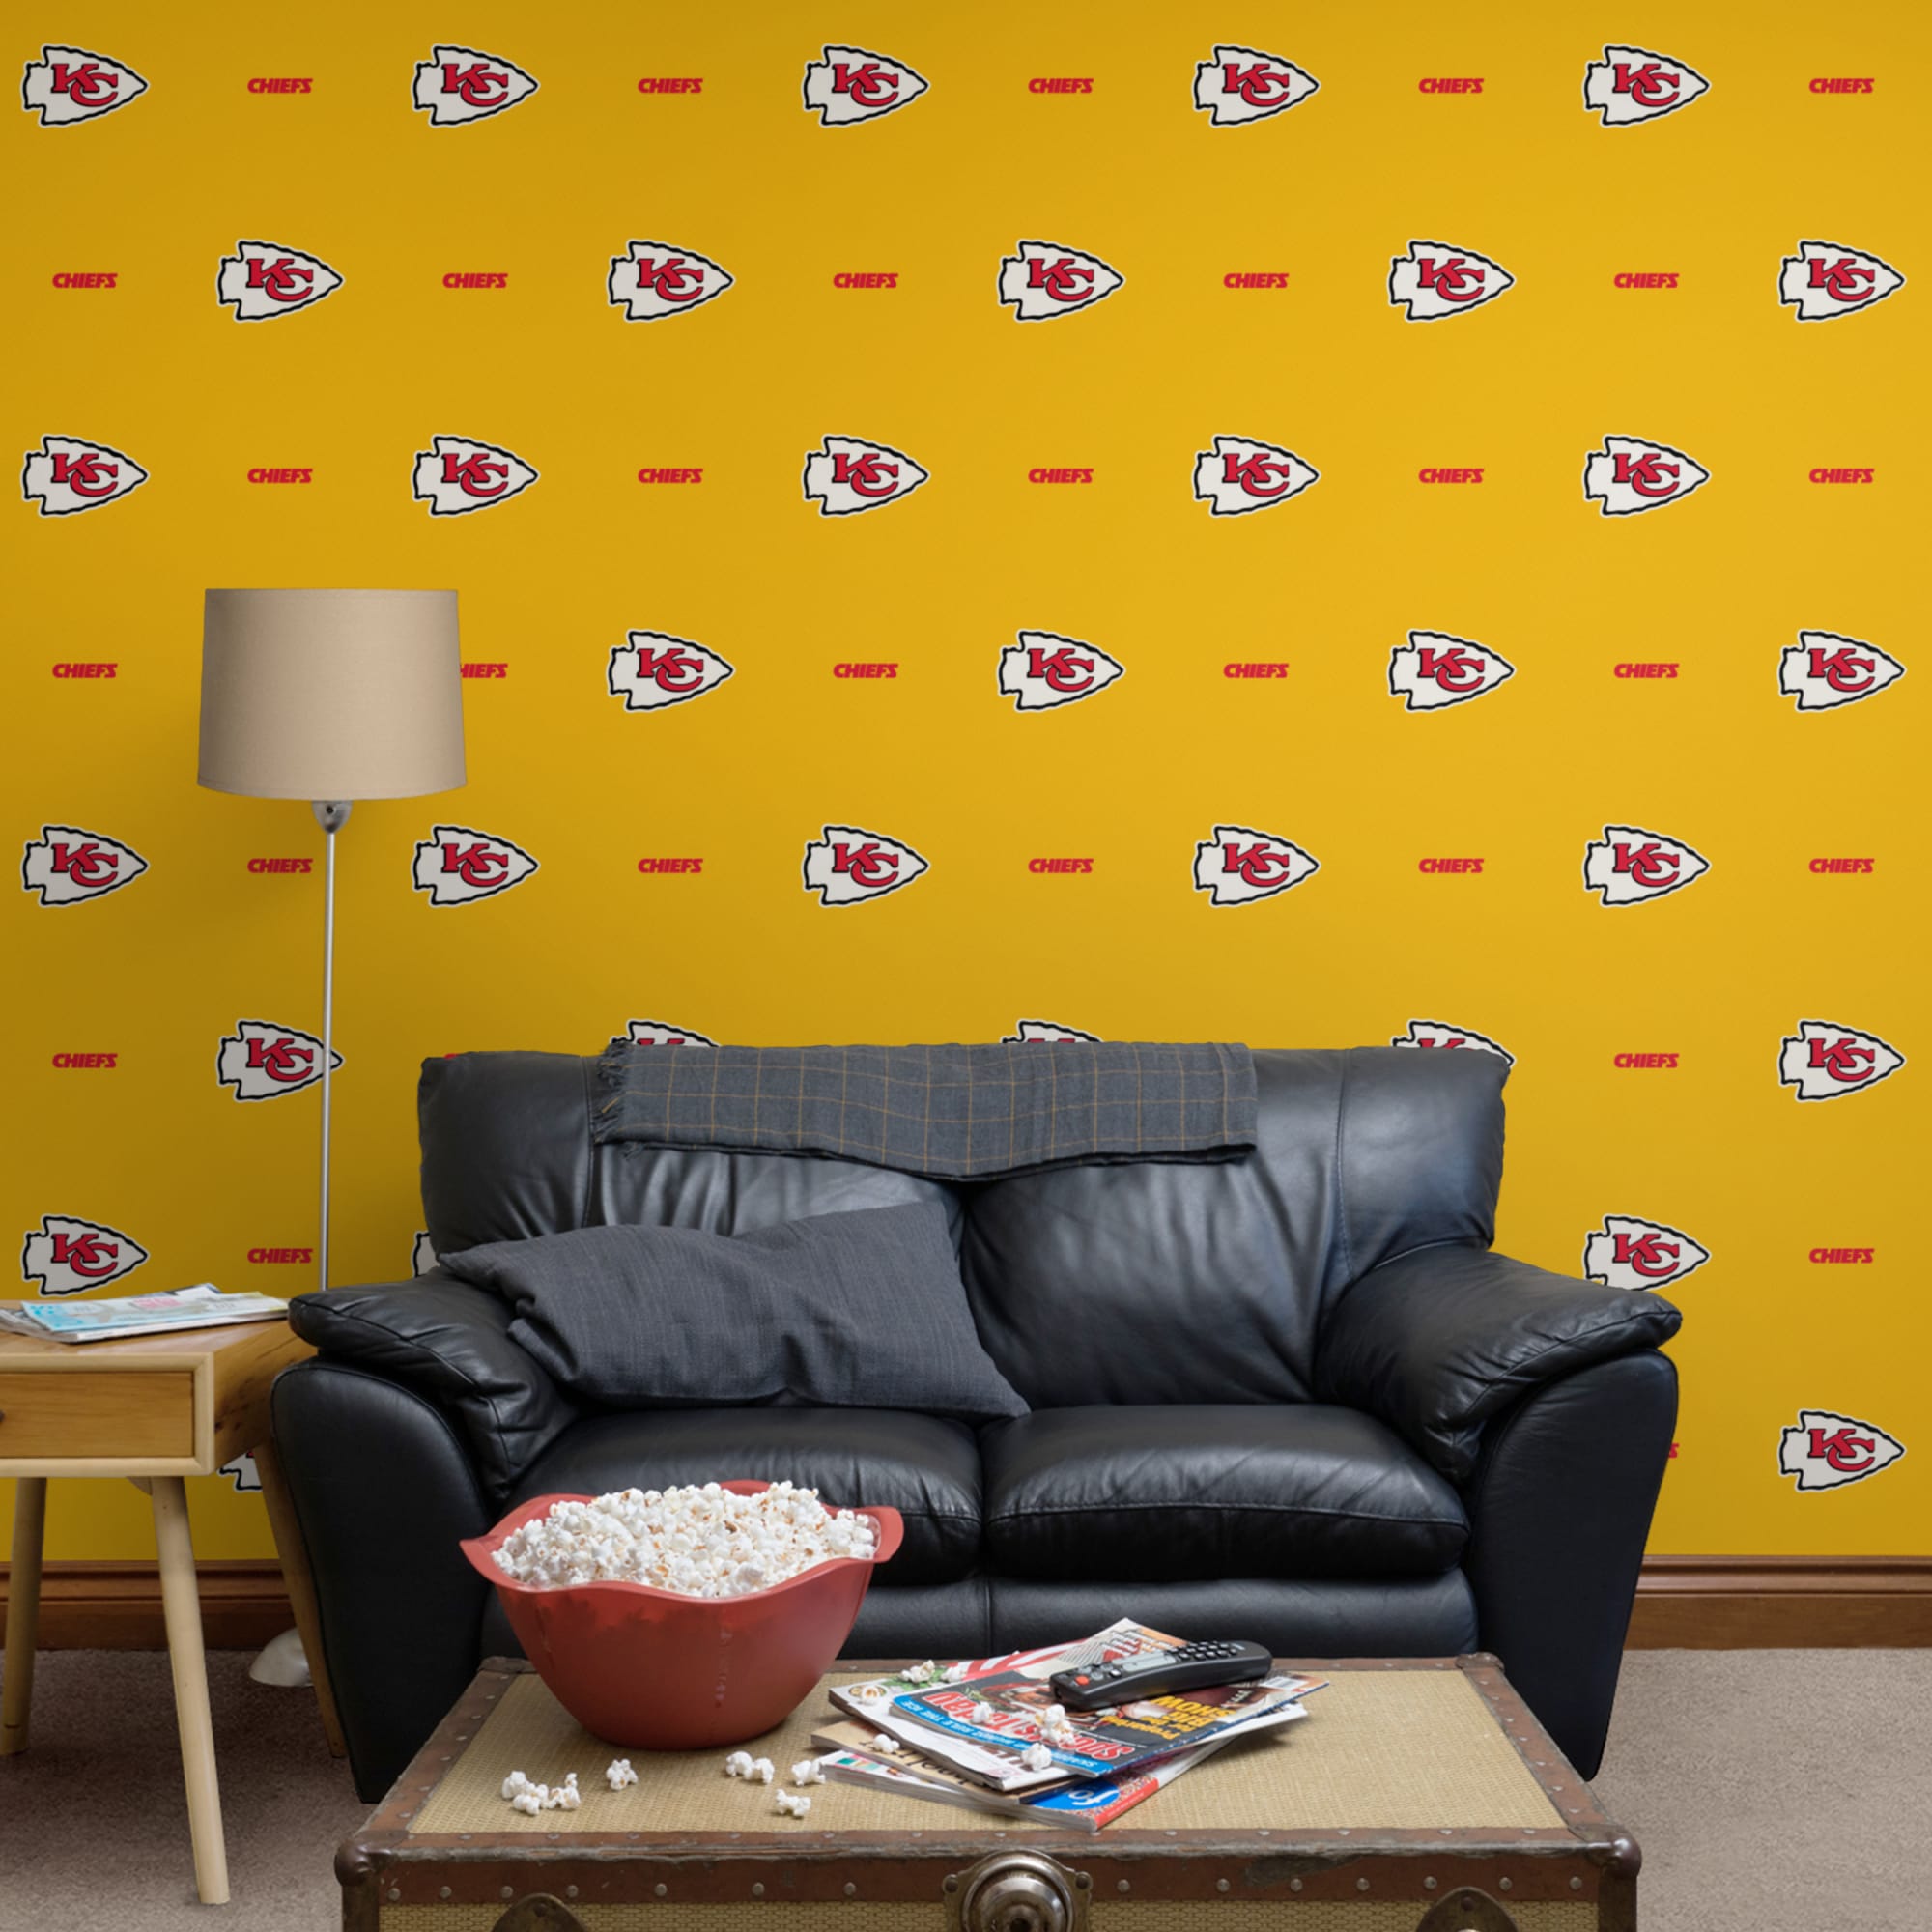 Kansas City Chiefs: Line Pattern - Officially Licensed NFL Removable Wallpaper 12" x 12" Sample by Fathead